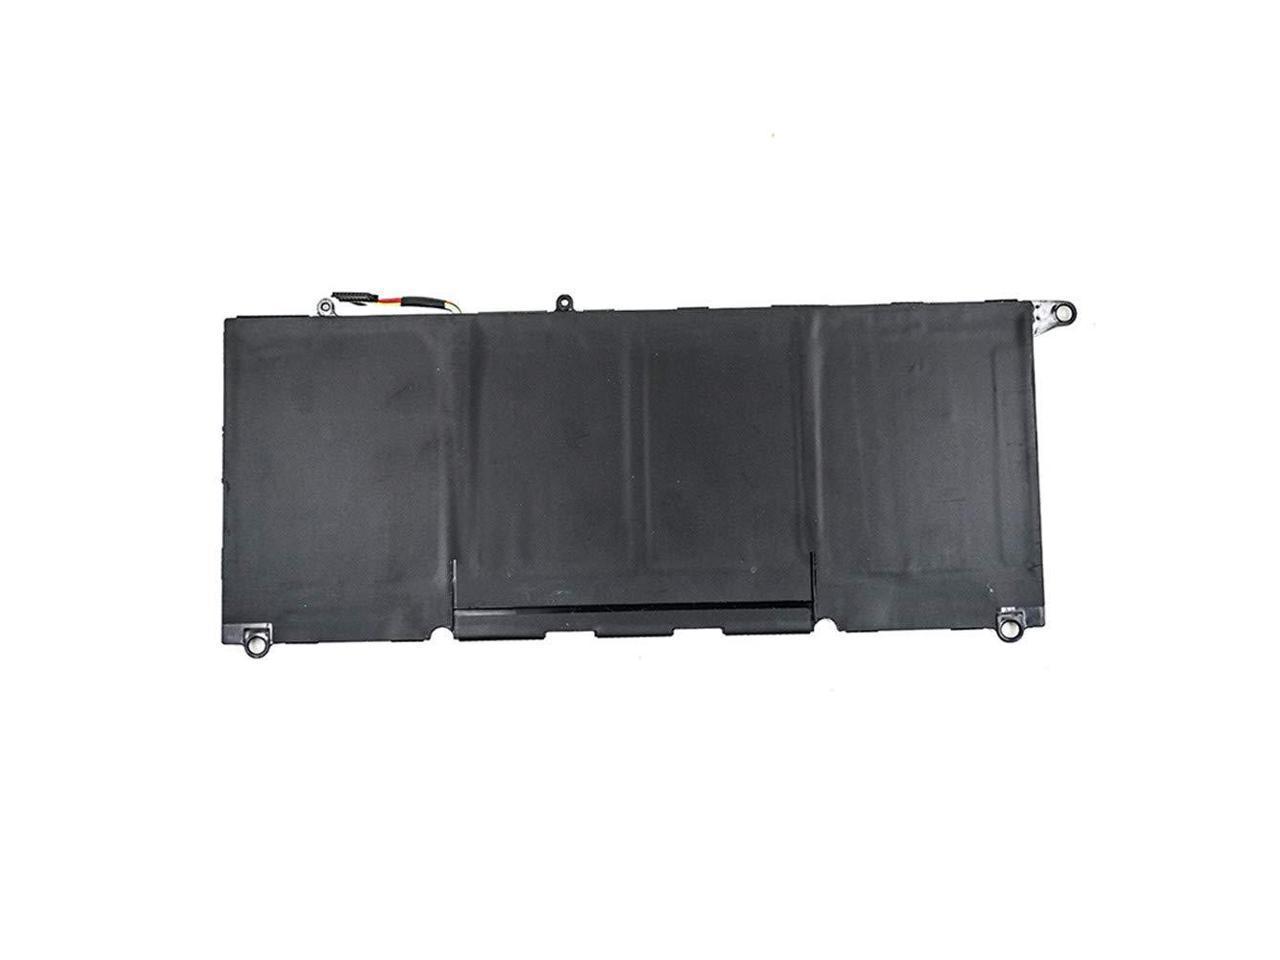 PW23Y Laptop Battery Compatible with Dell XPS 13 9360 13-9360-D1505G 13-9360-D1605G 13-9360-D1605T 13-9360-D1609 13-9360-D1609G 13-9360-D1705G XPS 13 2017 Series RNP72 TP1GT 0TP1GT 0RNP72